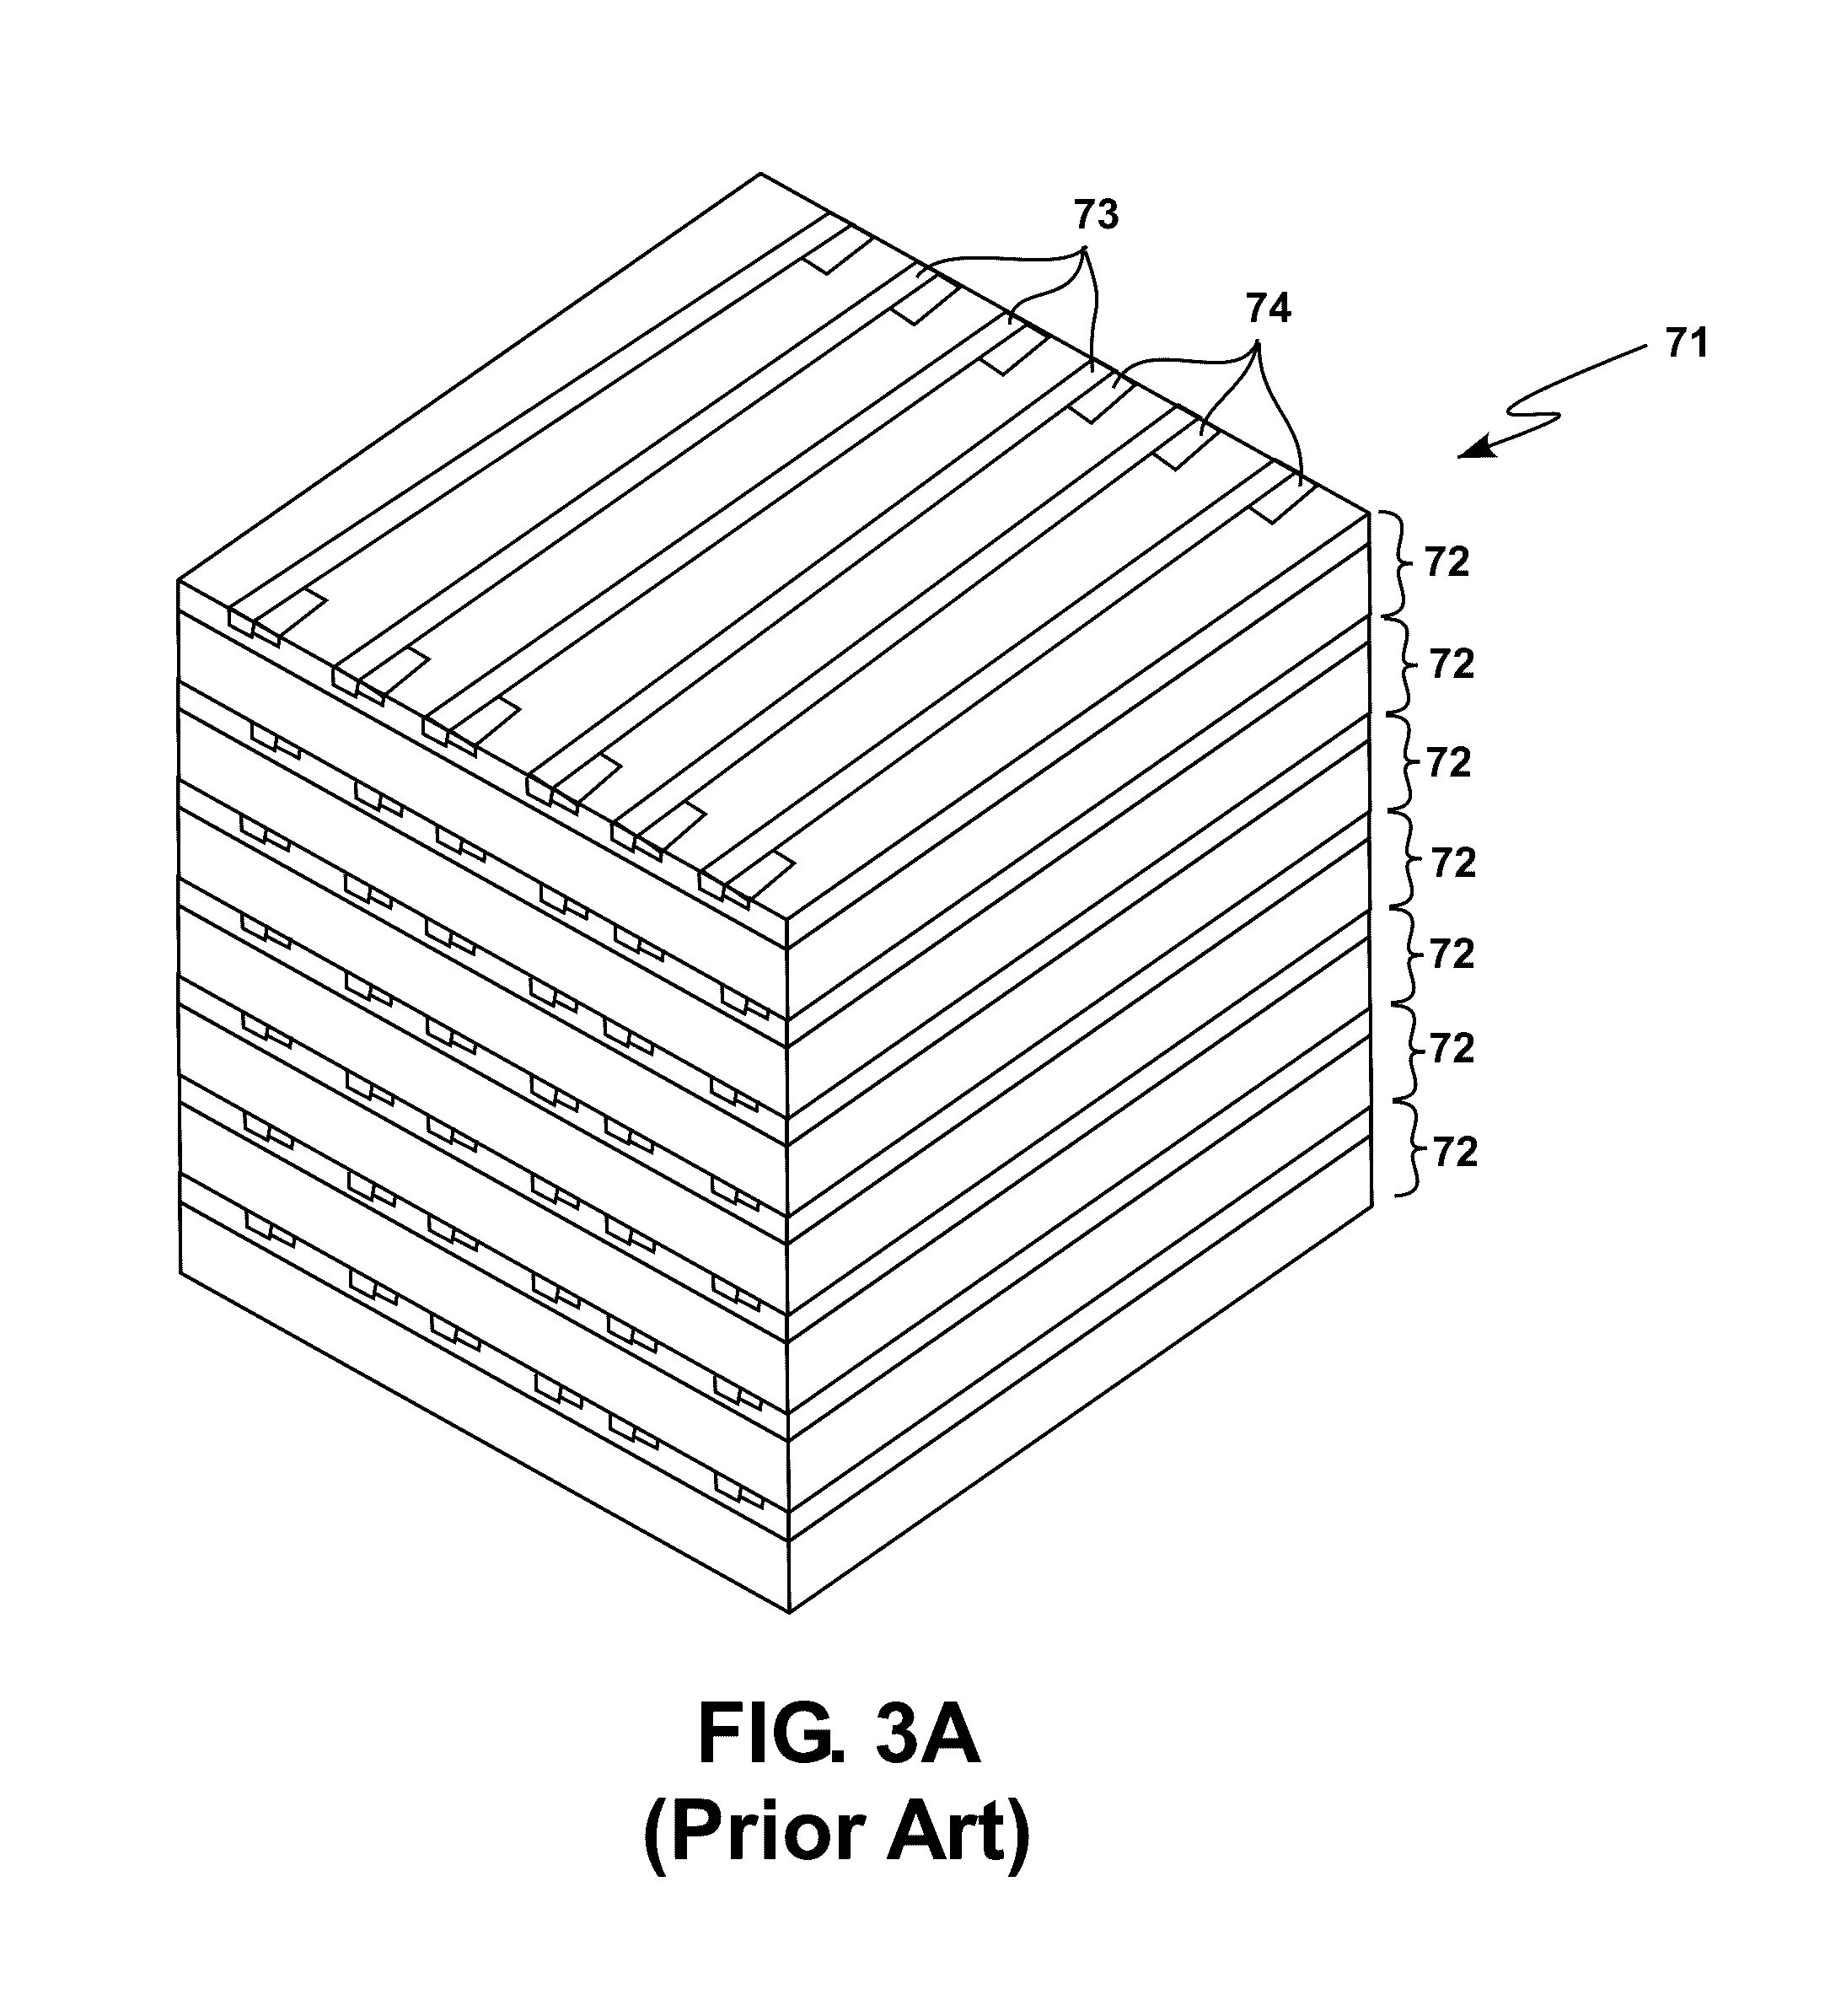 Stacked rows pseudo-randomly spaced two-dimensional phased array assembly